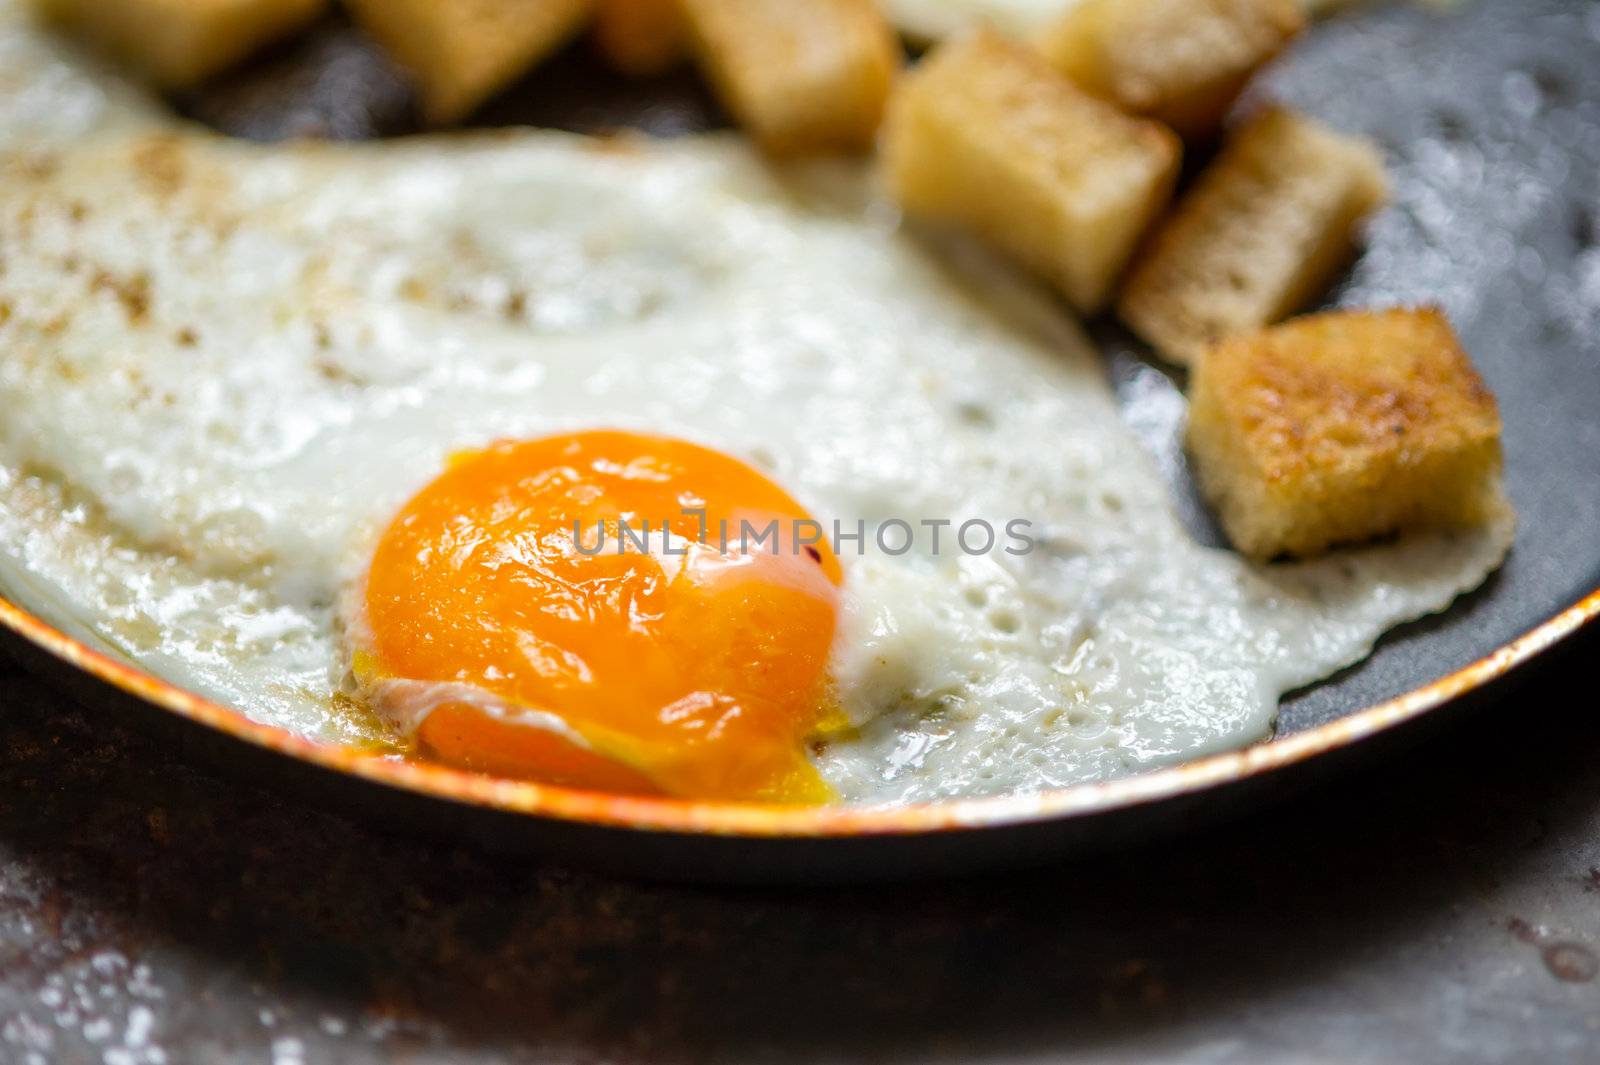 Frying pan full of scramble eggs from two eggs with a small pieces of toasted bread. Stands on grunge metal background.